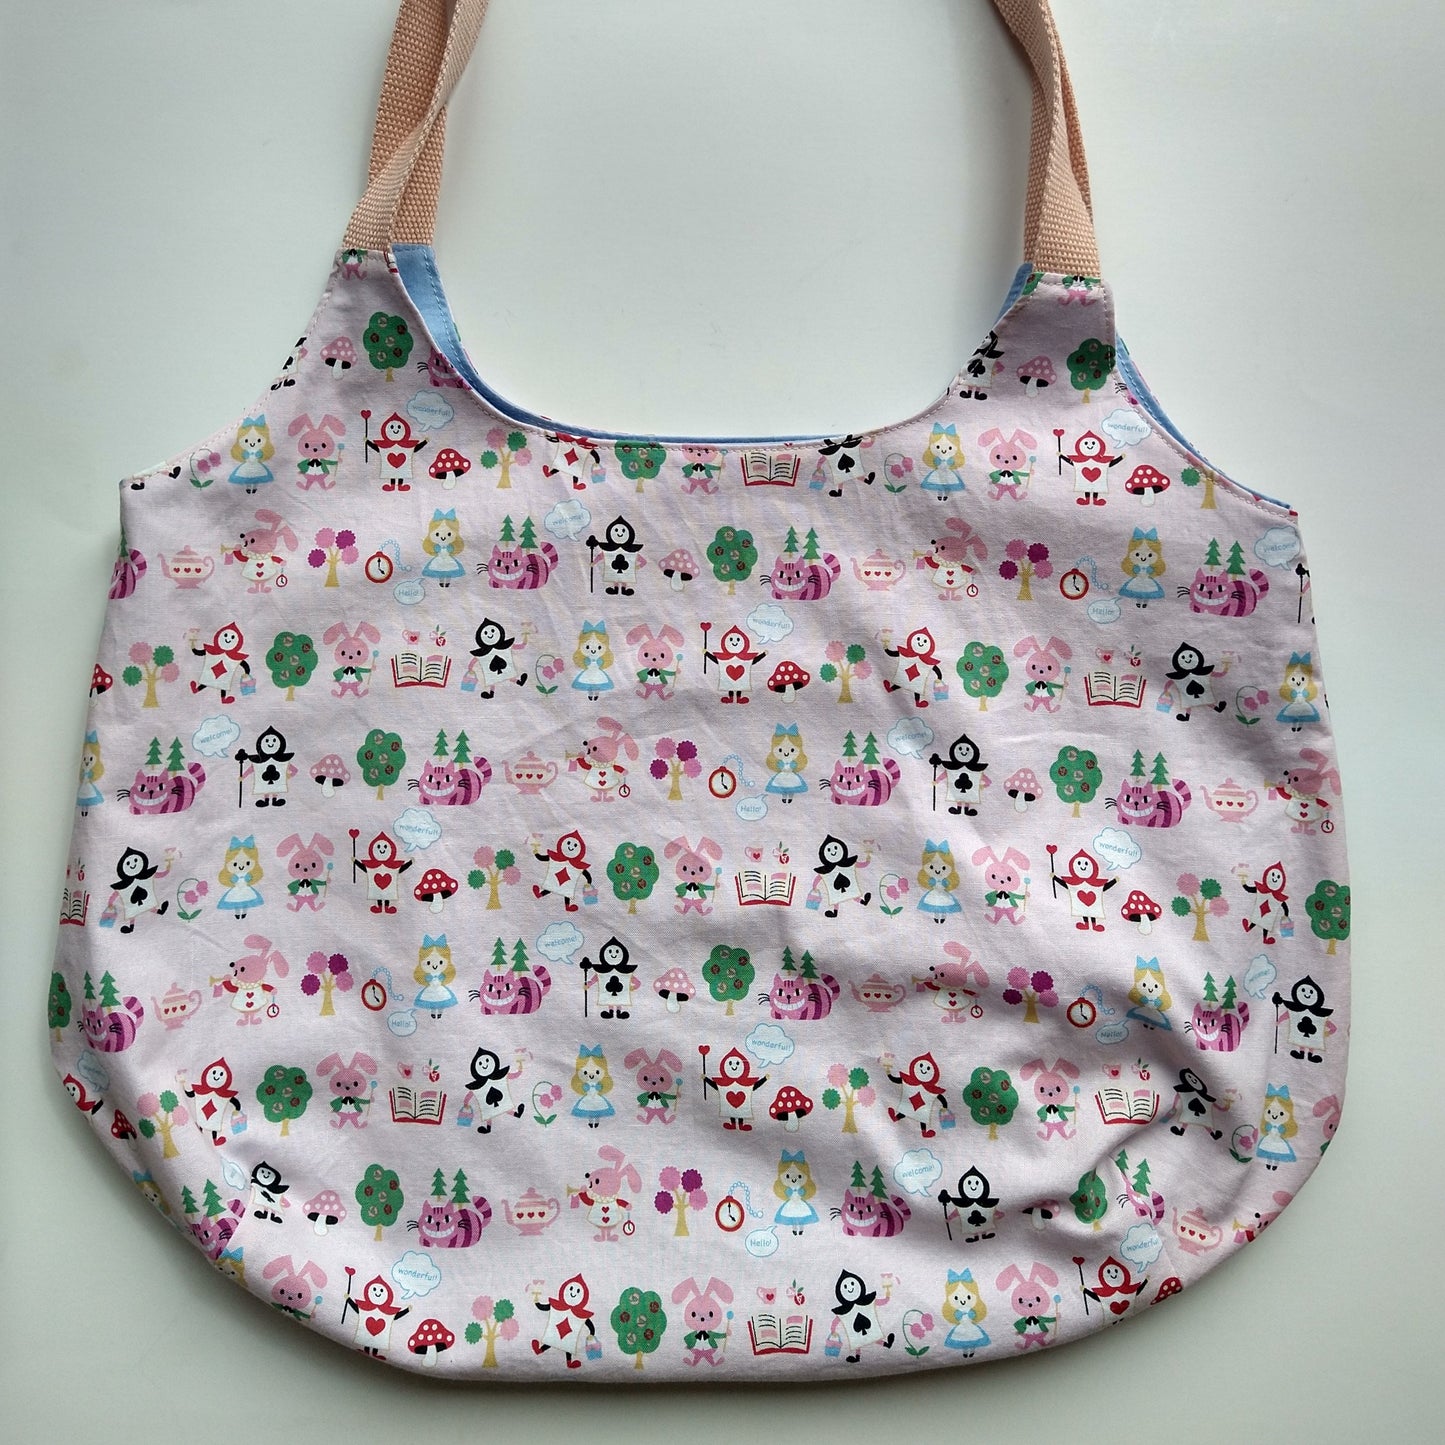 Shopping bag, reversible, size small, Alice light pink (Handmade in Canada)